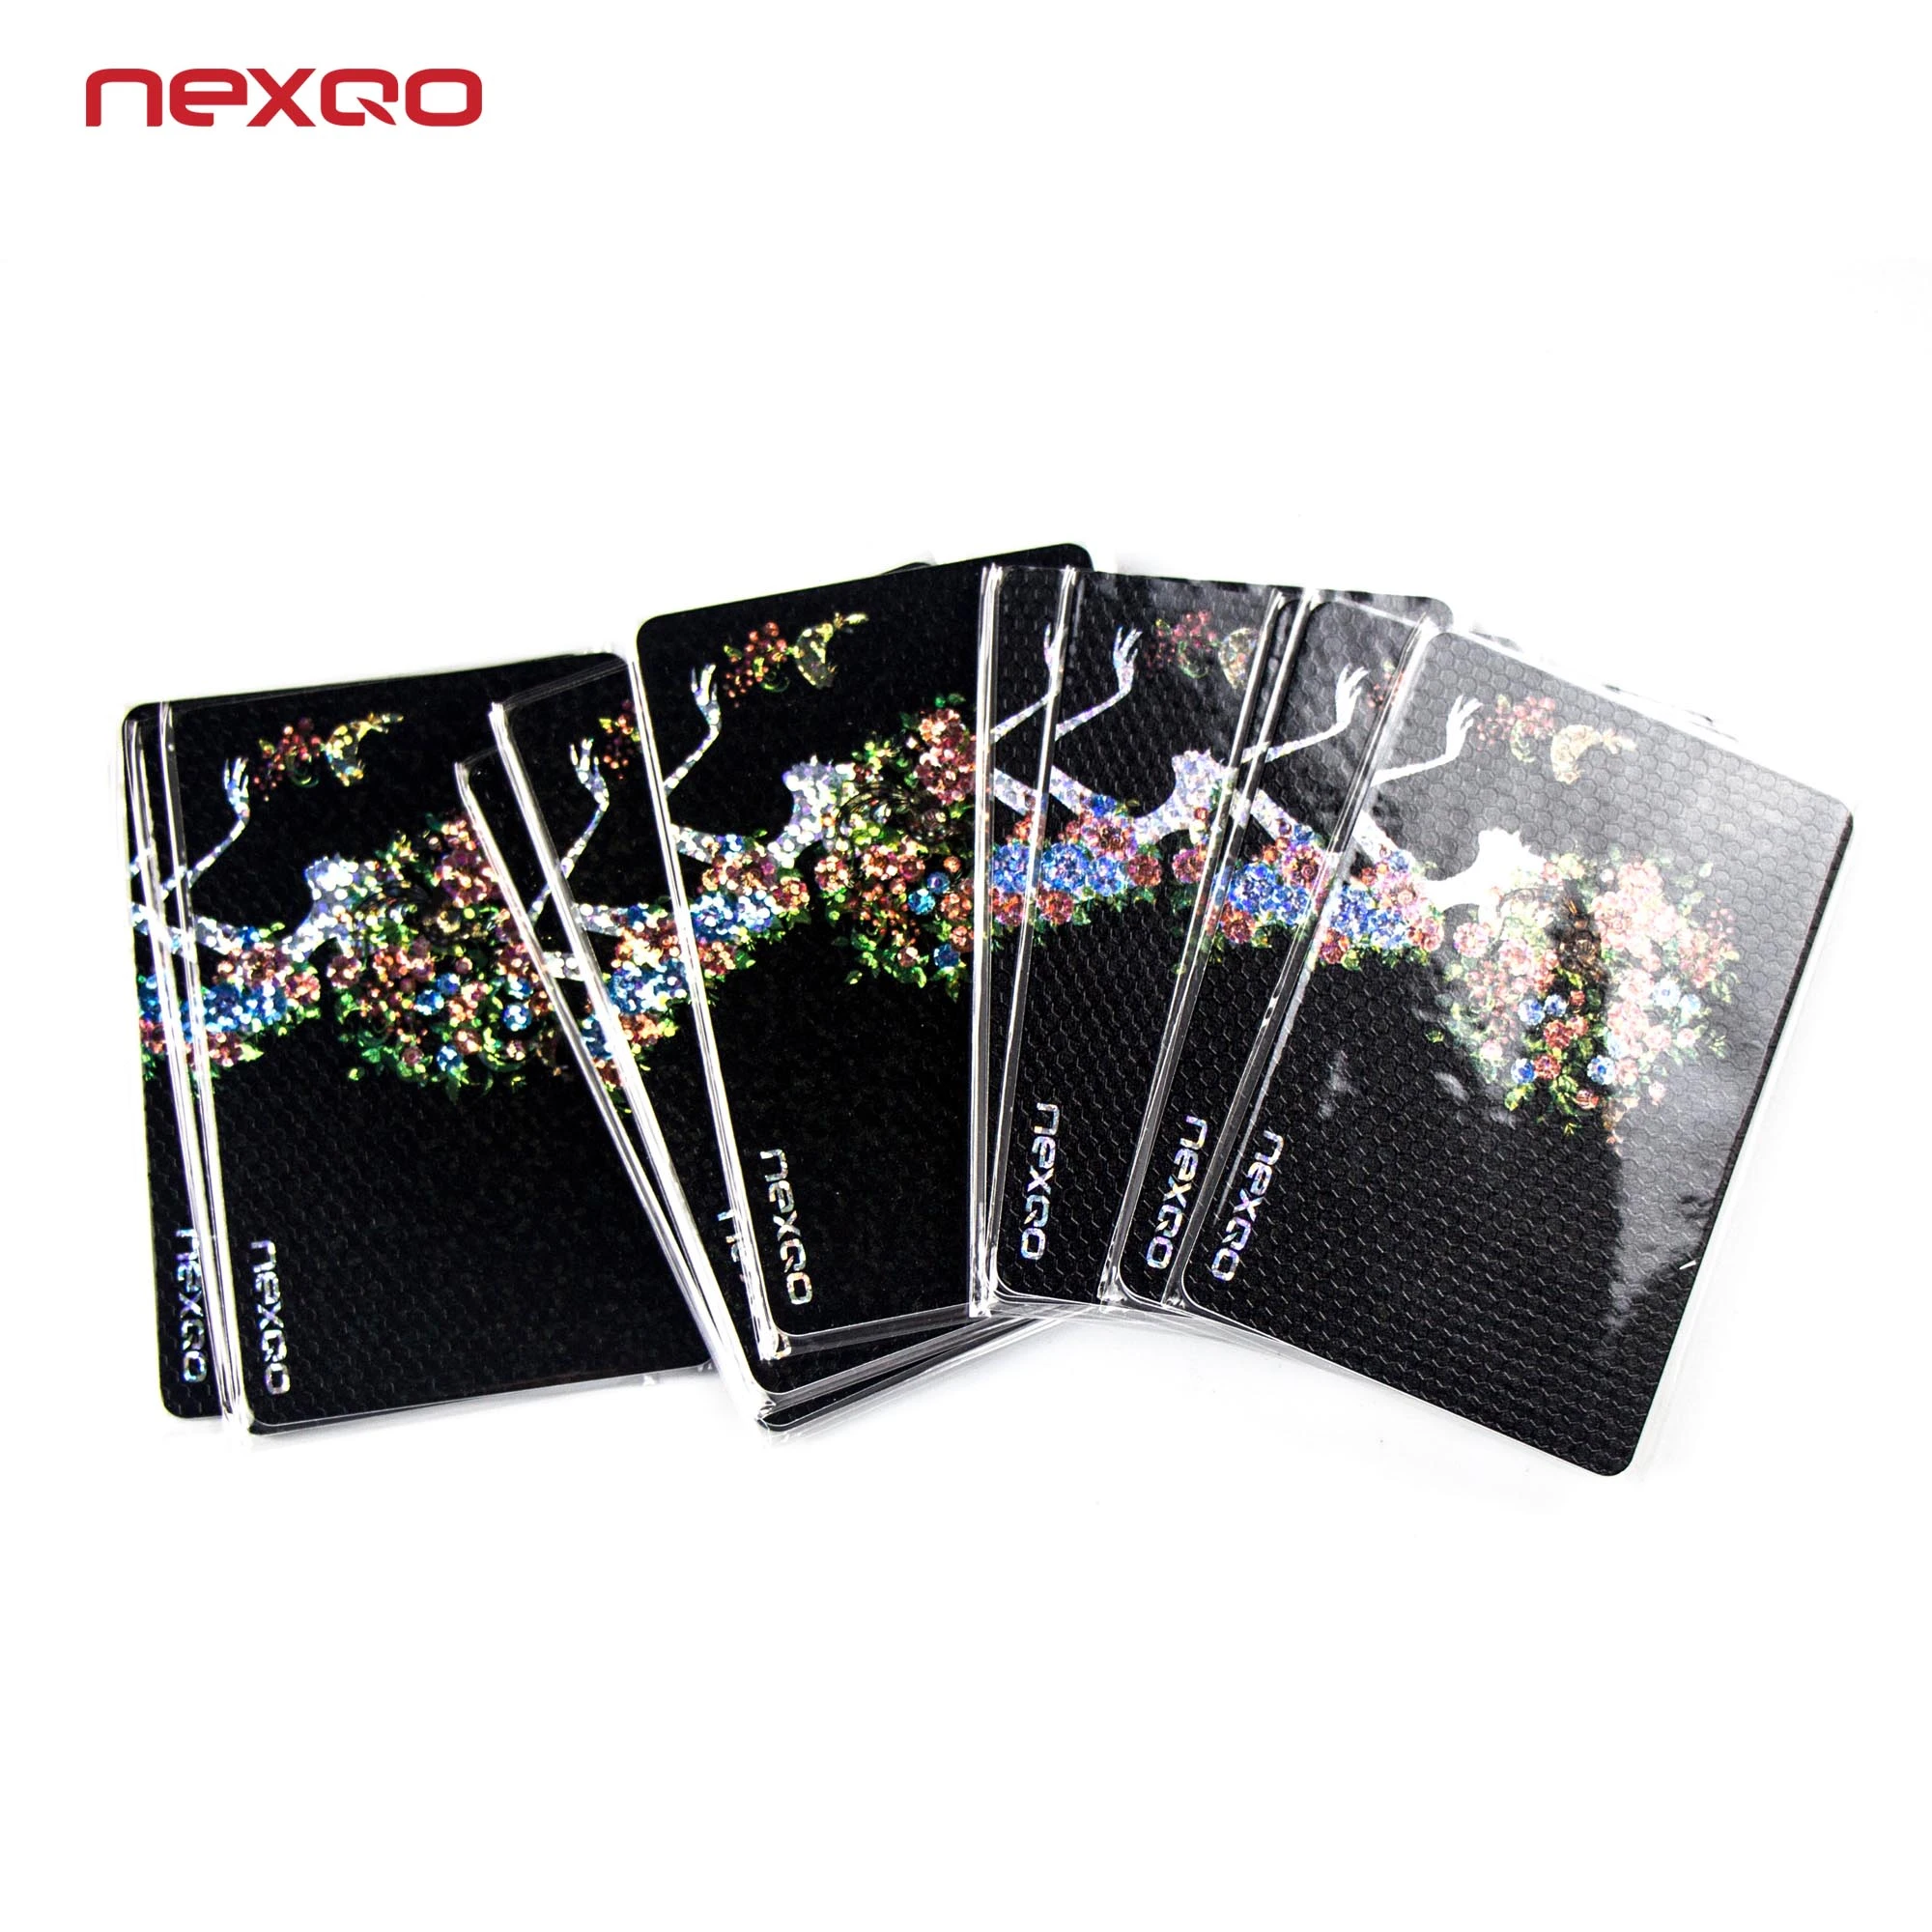 Durable contactless proximity RFID smart chip card for hotel room access control